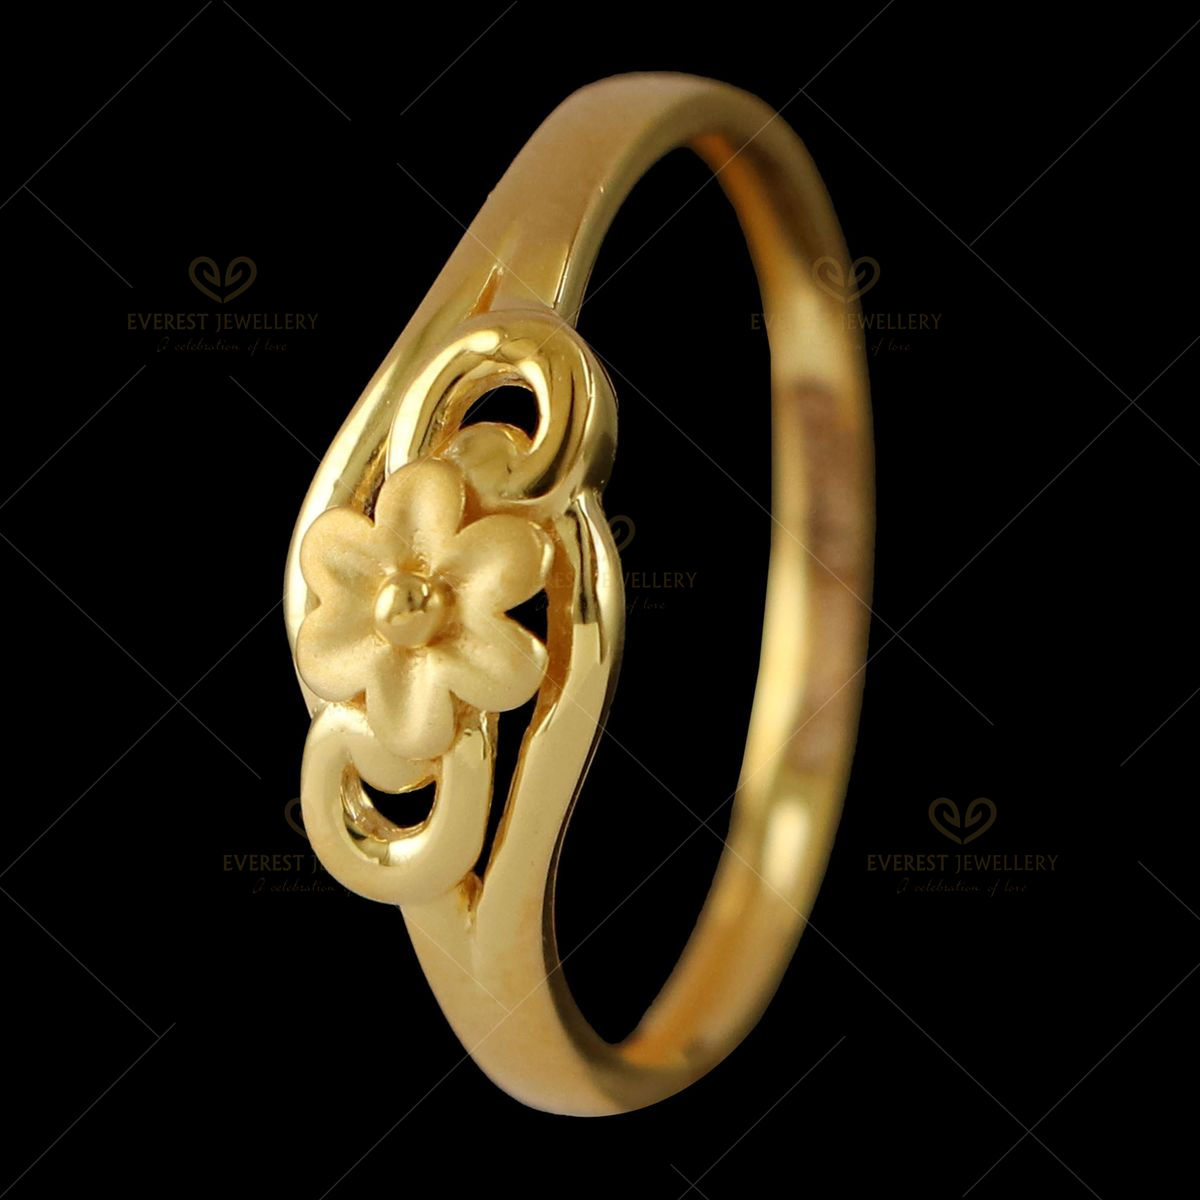 Arya Gold & Jewellery - Casting Ladies Ring 22K Hallmarked Wt:- 2.160 grams  Approx Price:- RS 11000 - Rs 12000 Size:- Available in all Sizes The price  of the product may vary